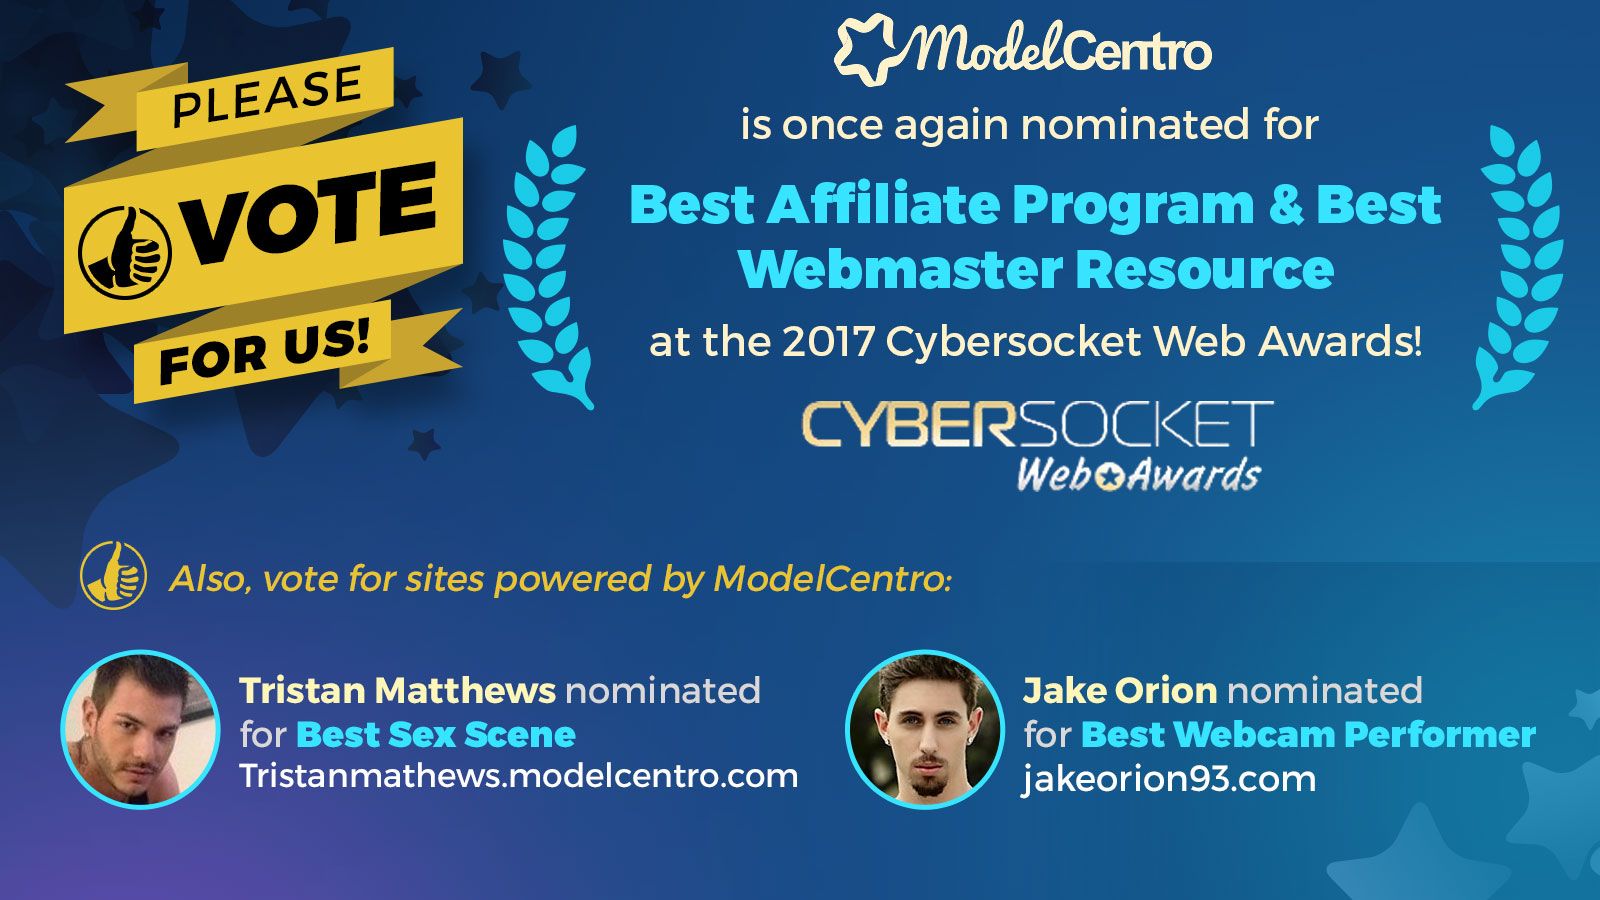 ModelCentro Recognized With 2 Cybersocket Nominations